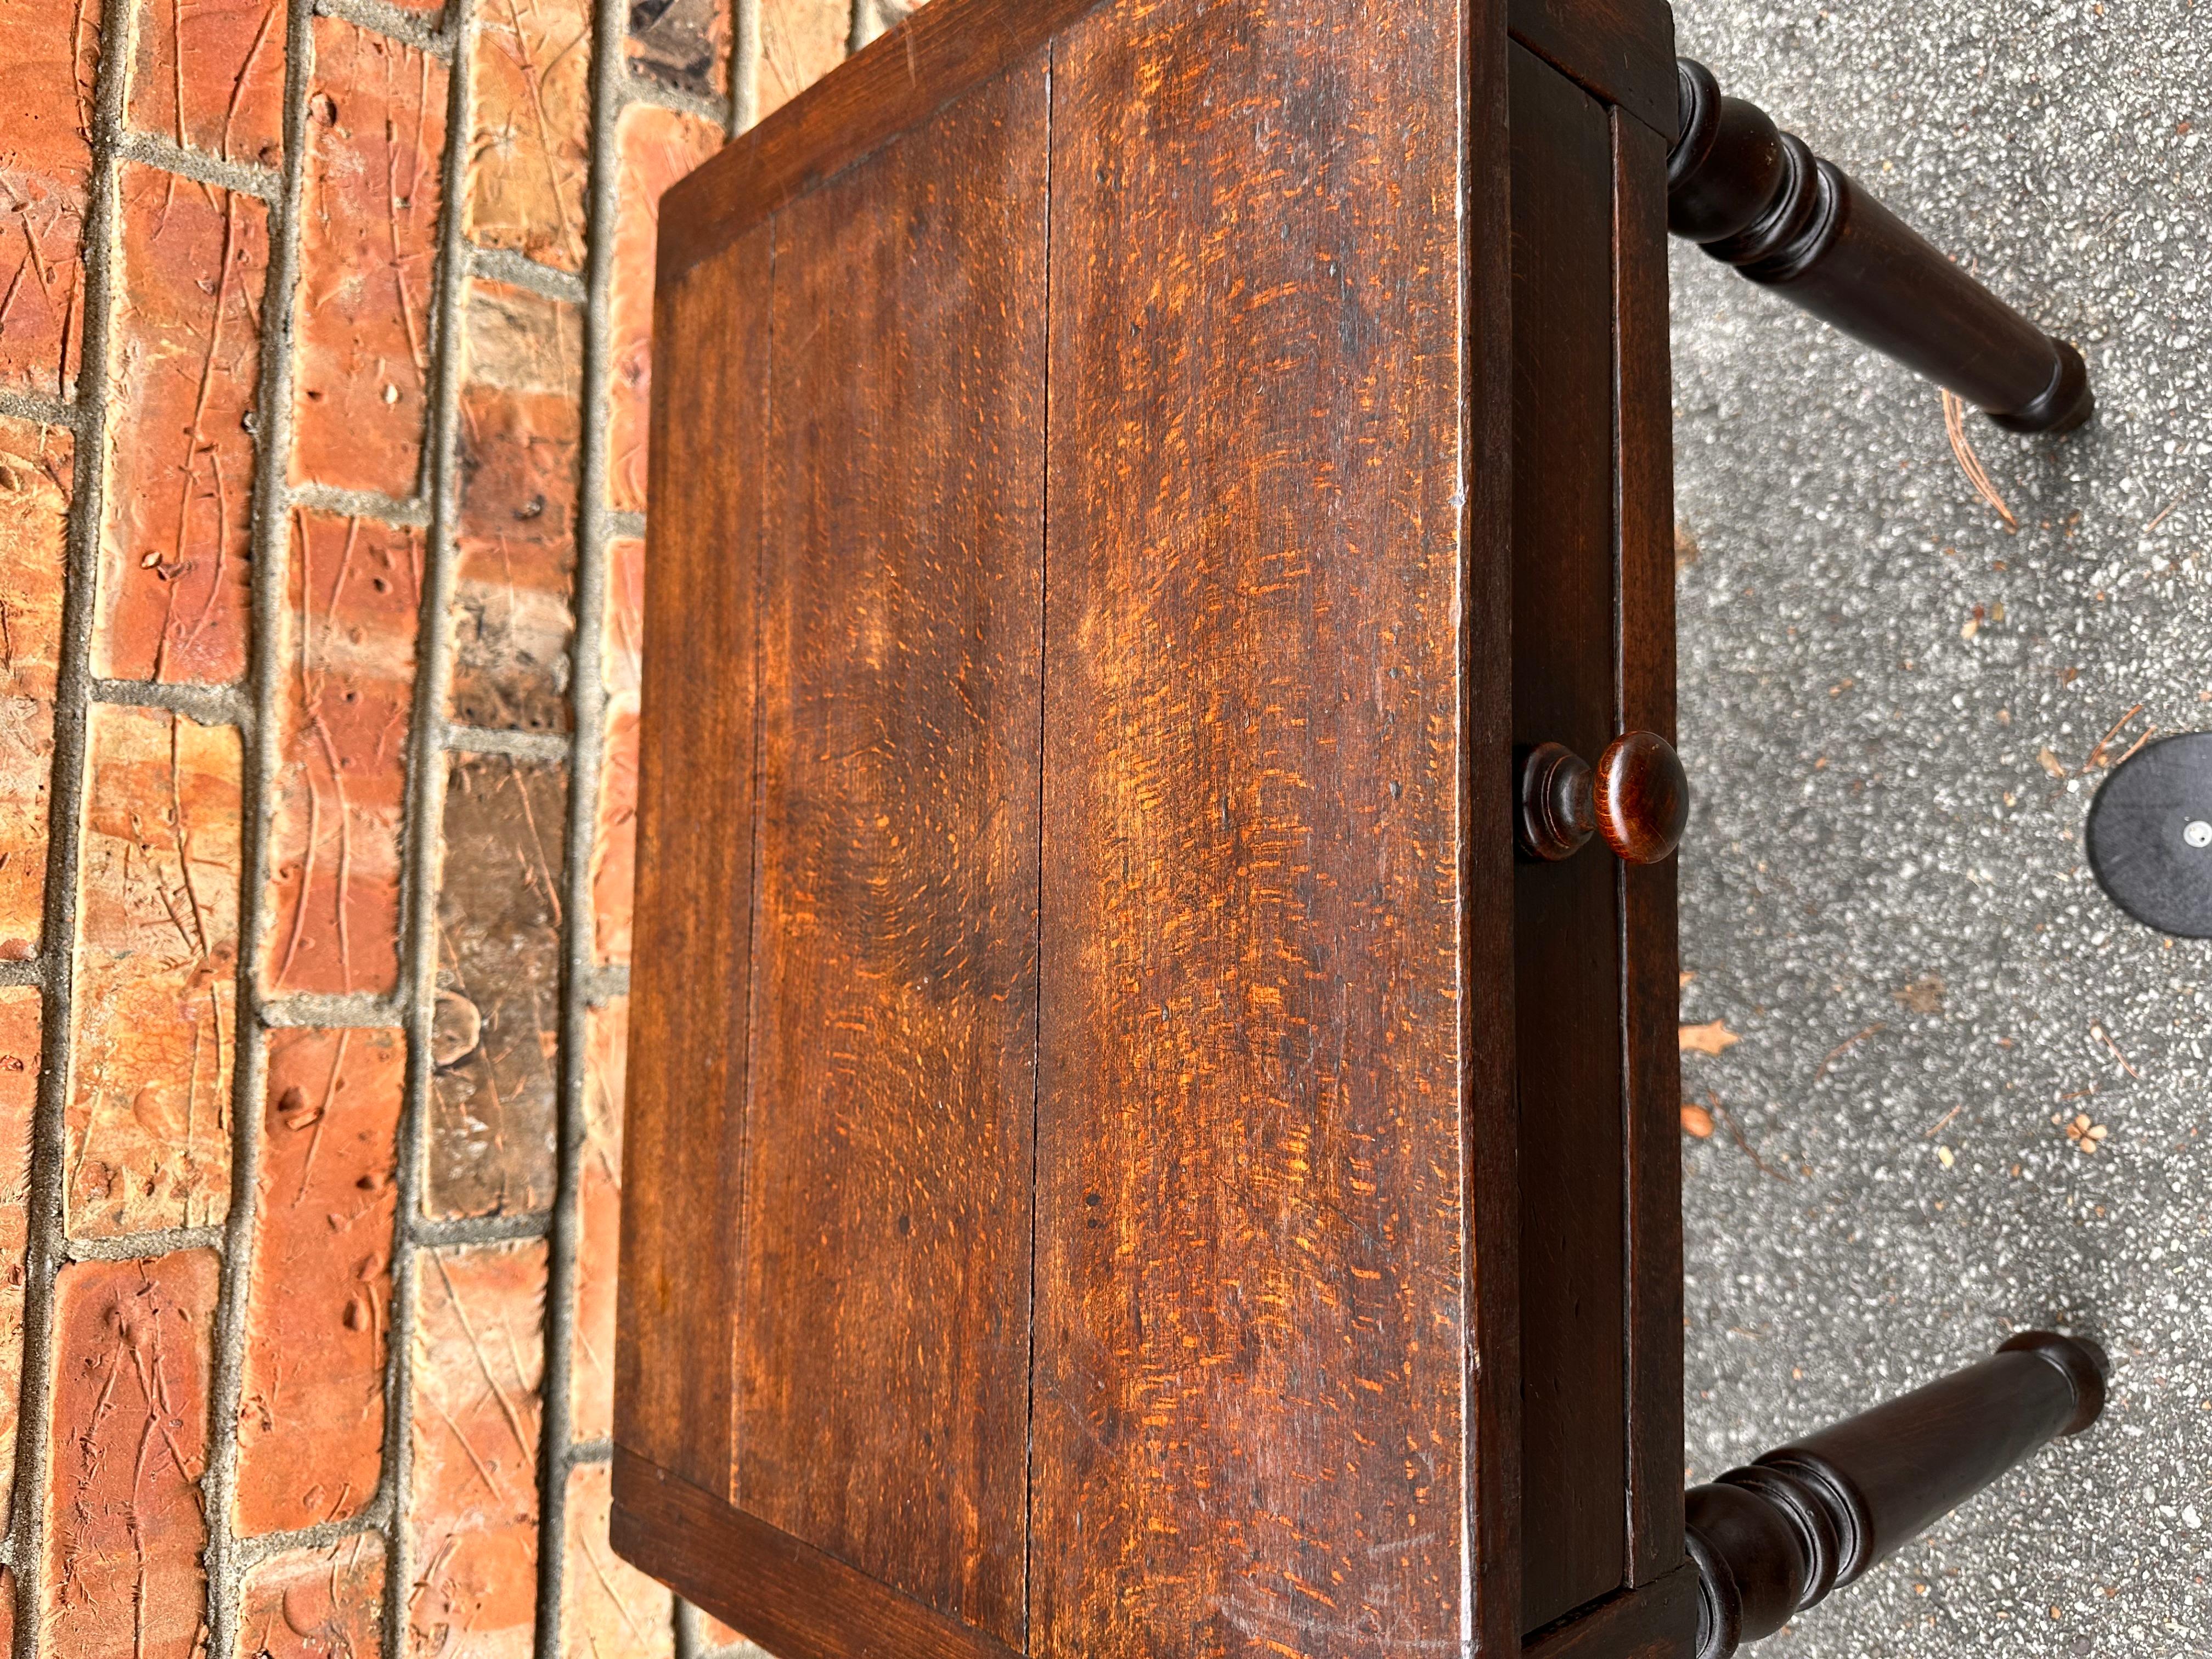 This is an adorable little antique side table features a single small drawer for added function! The rich deep wood tones of the table blend together beautifully and is intensified by this piece's lovely patina. It is a perfect way to add more table